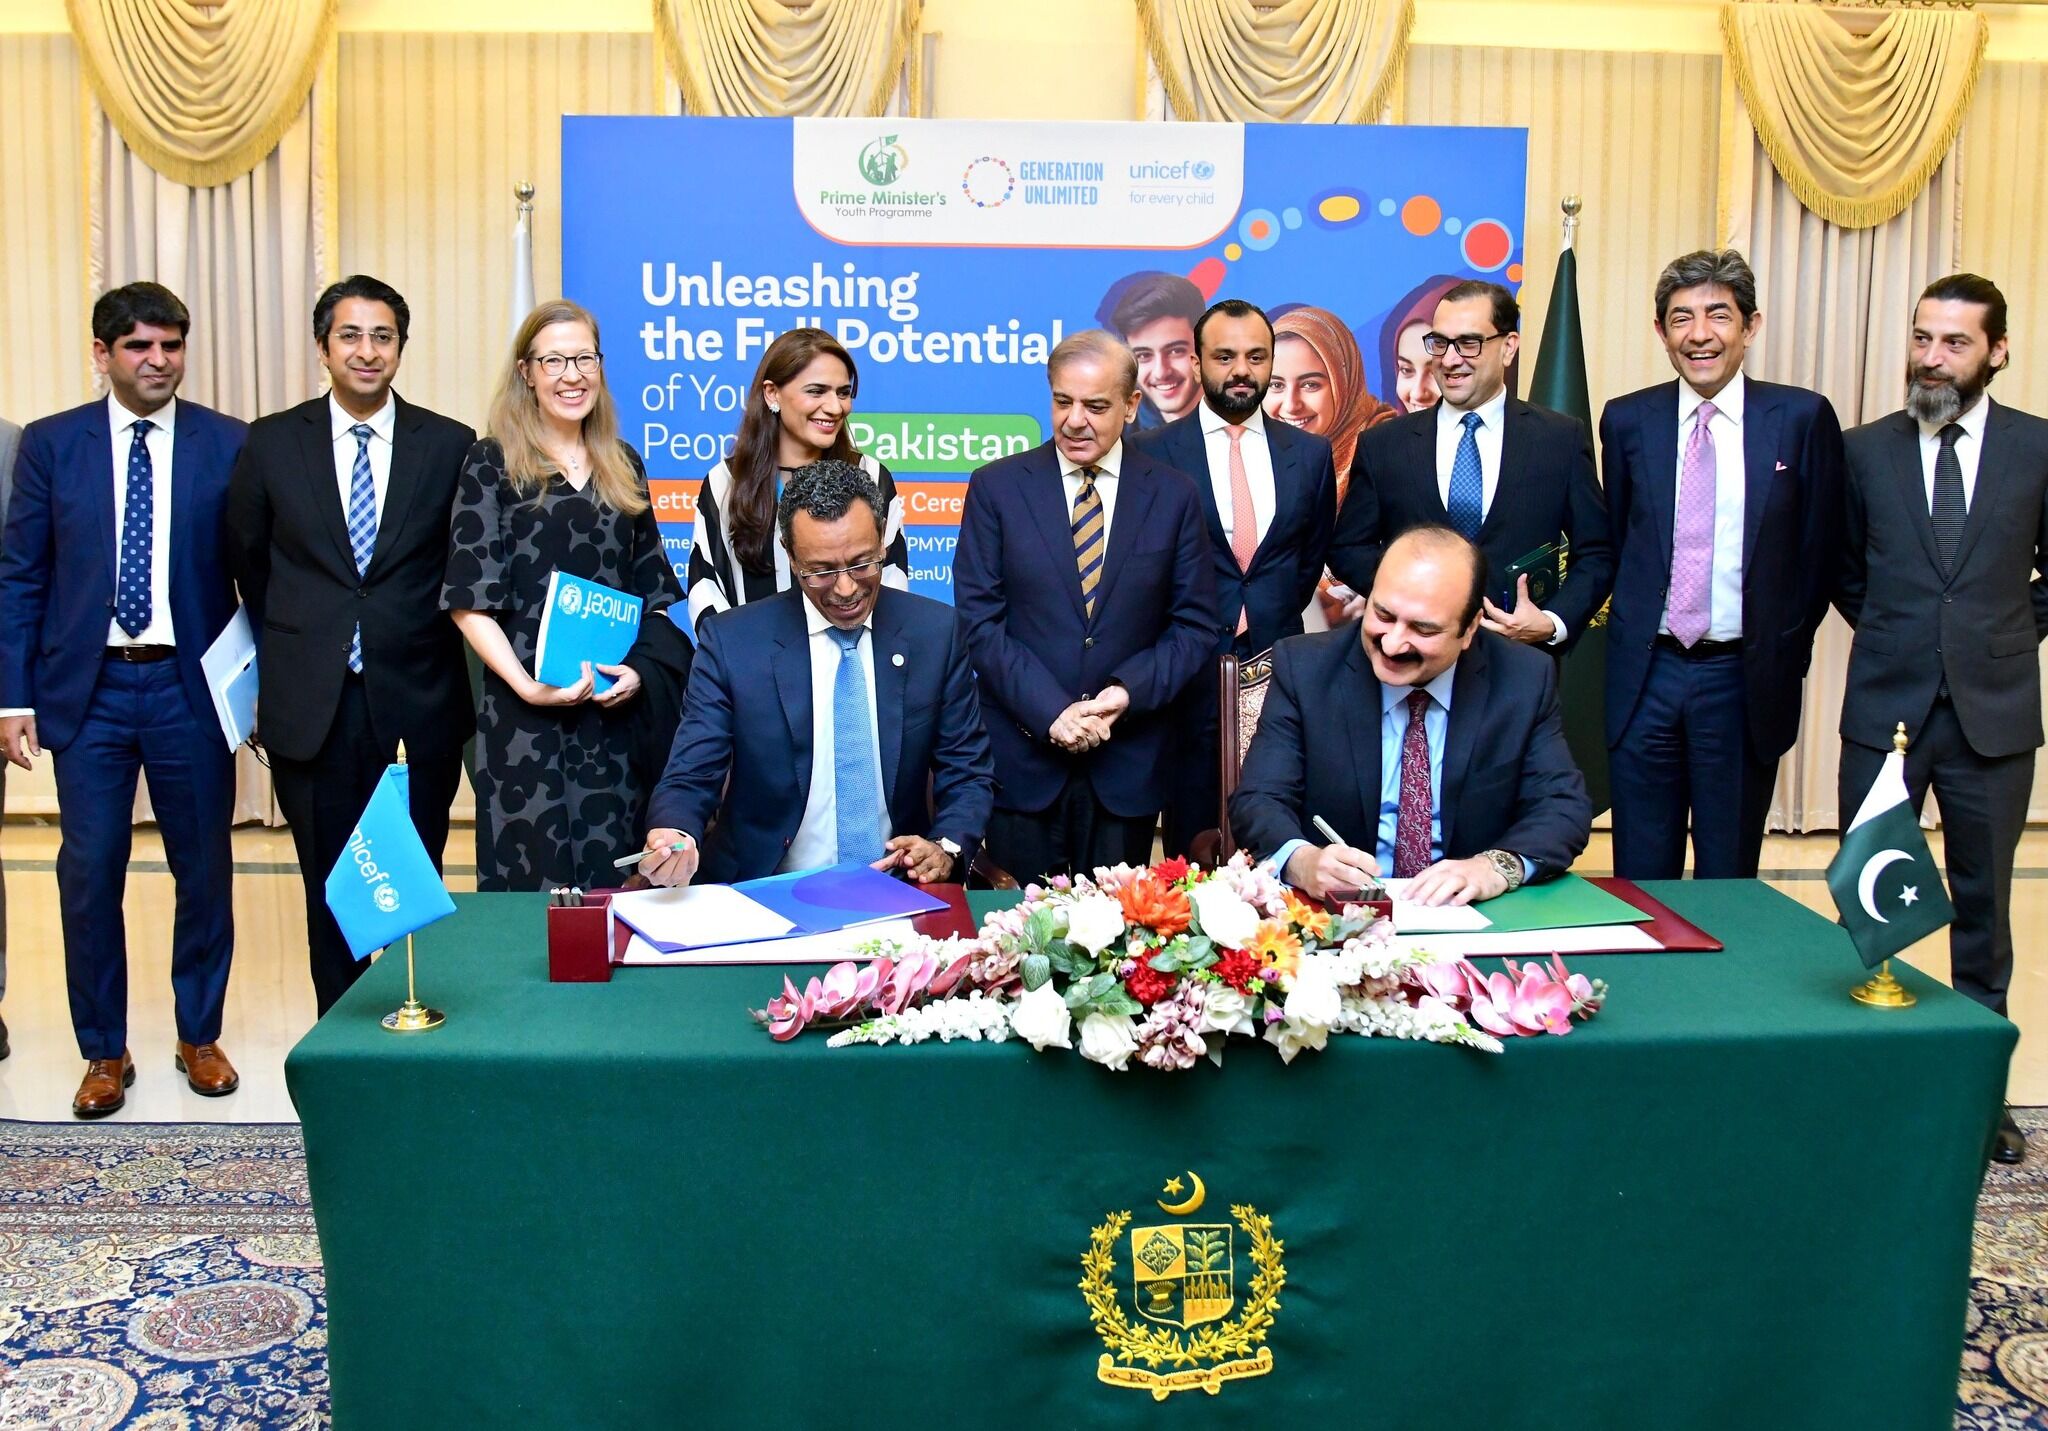 Prime Minister’s Youth Programme and UNICEF Join Forces for Youth Empowerment in Pakistan